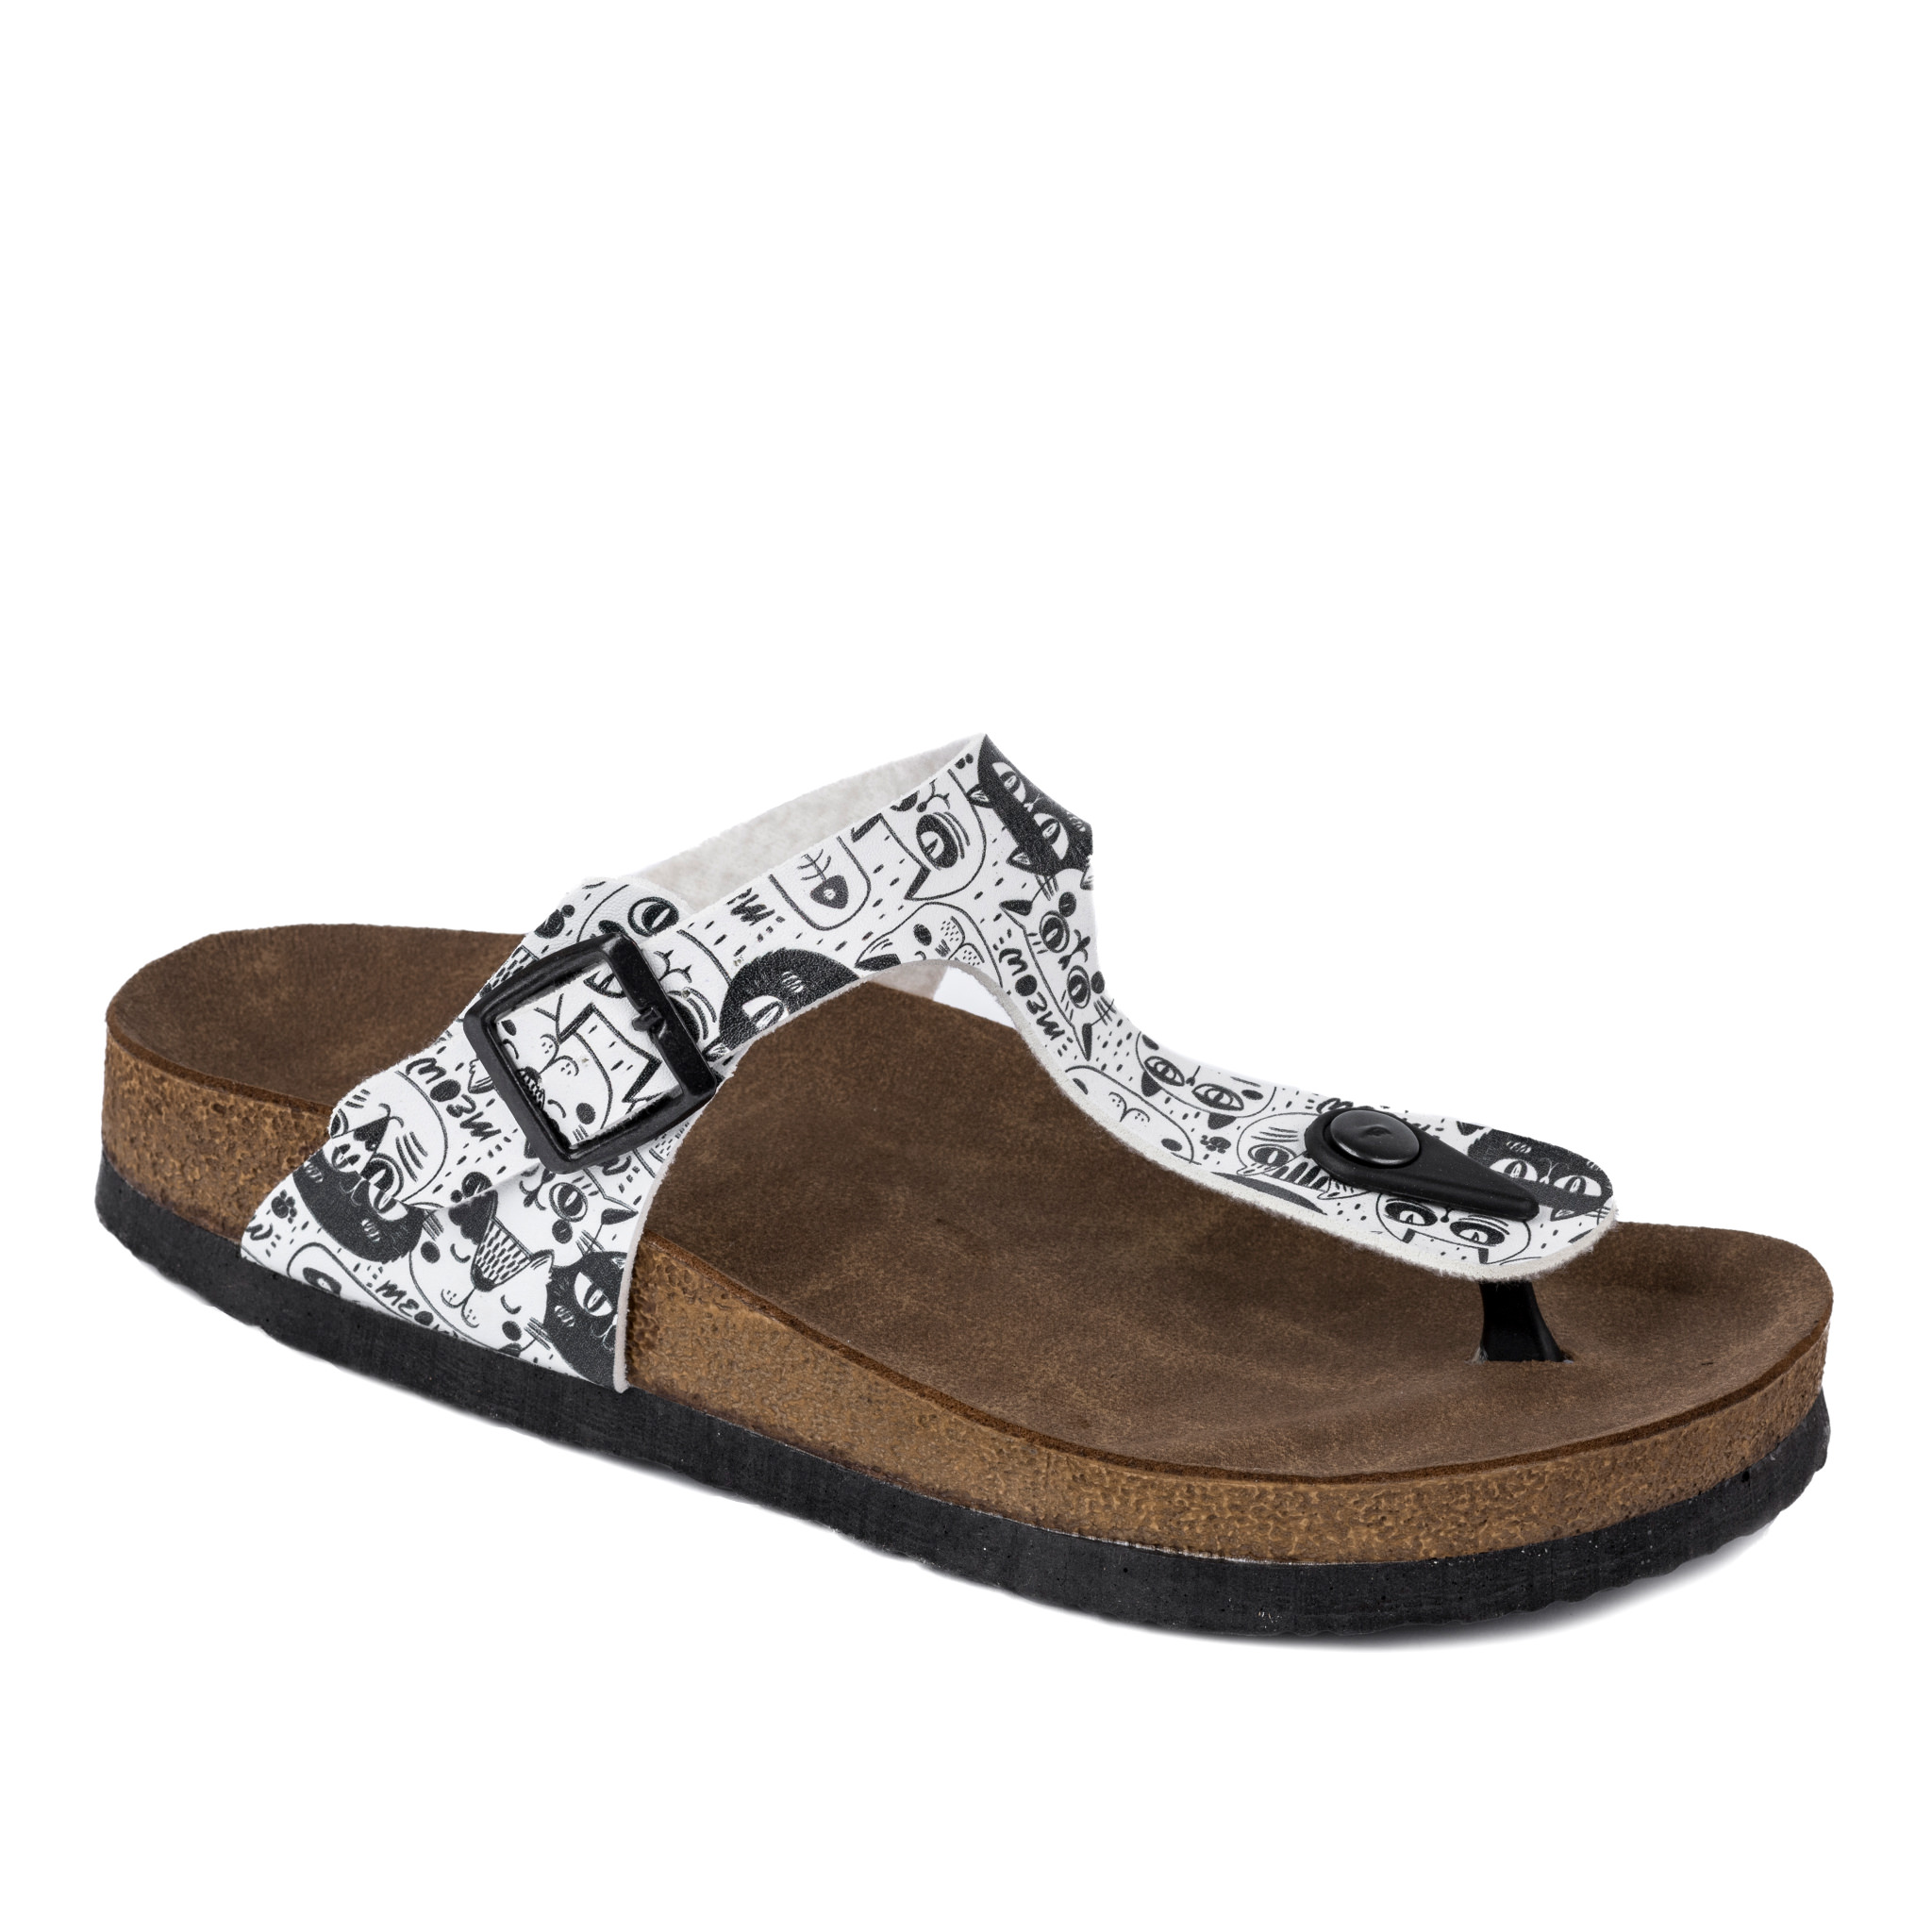 MEOW FLIP - FLOPS WITH BELT - WHITE